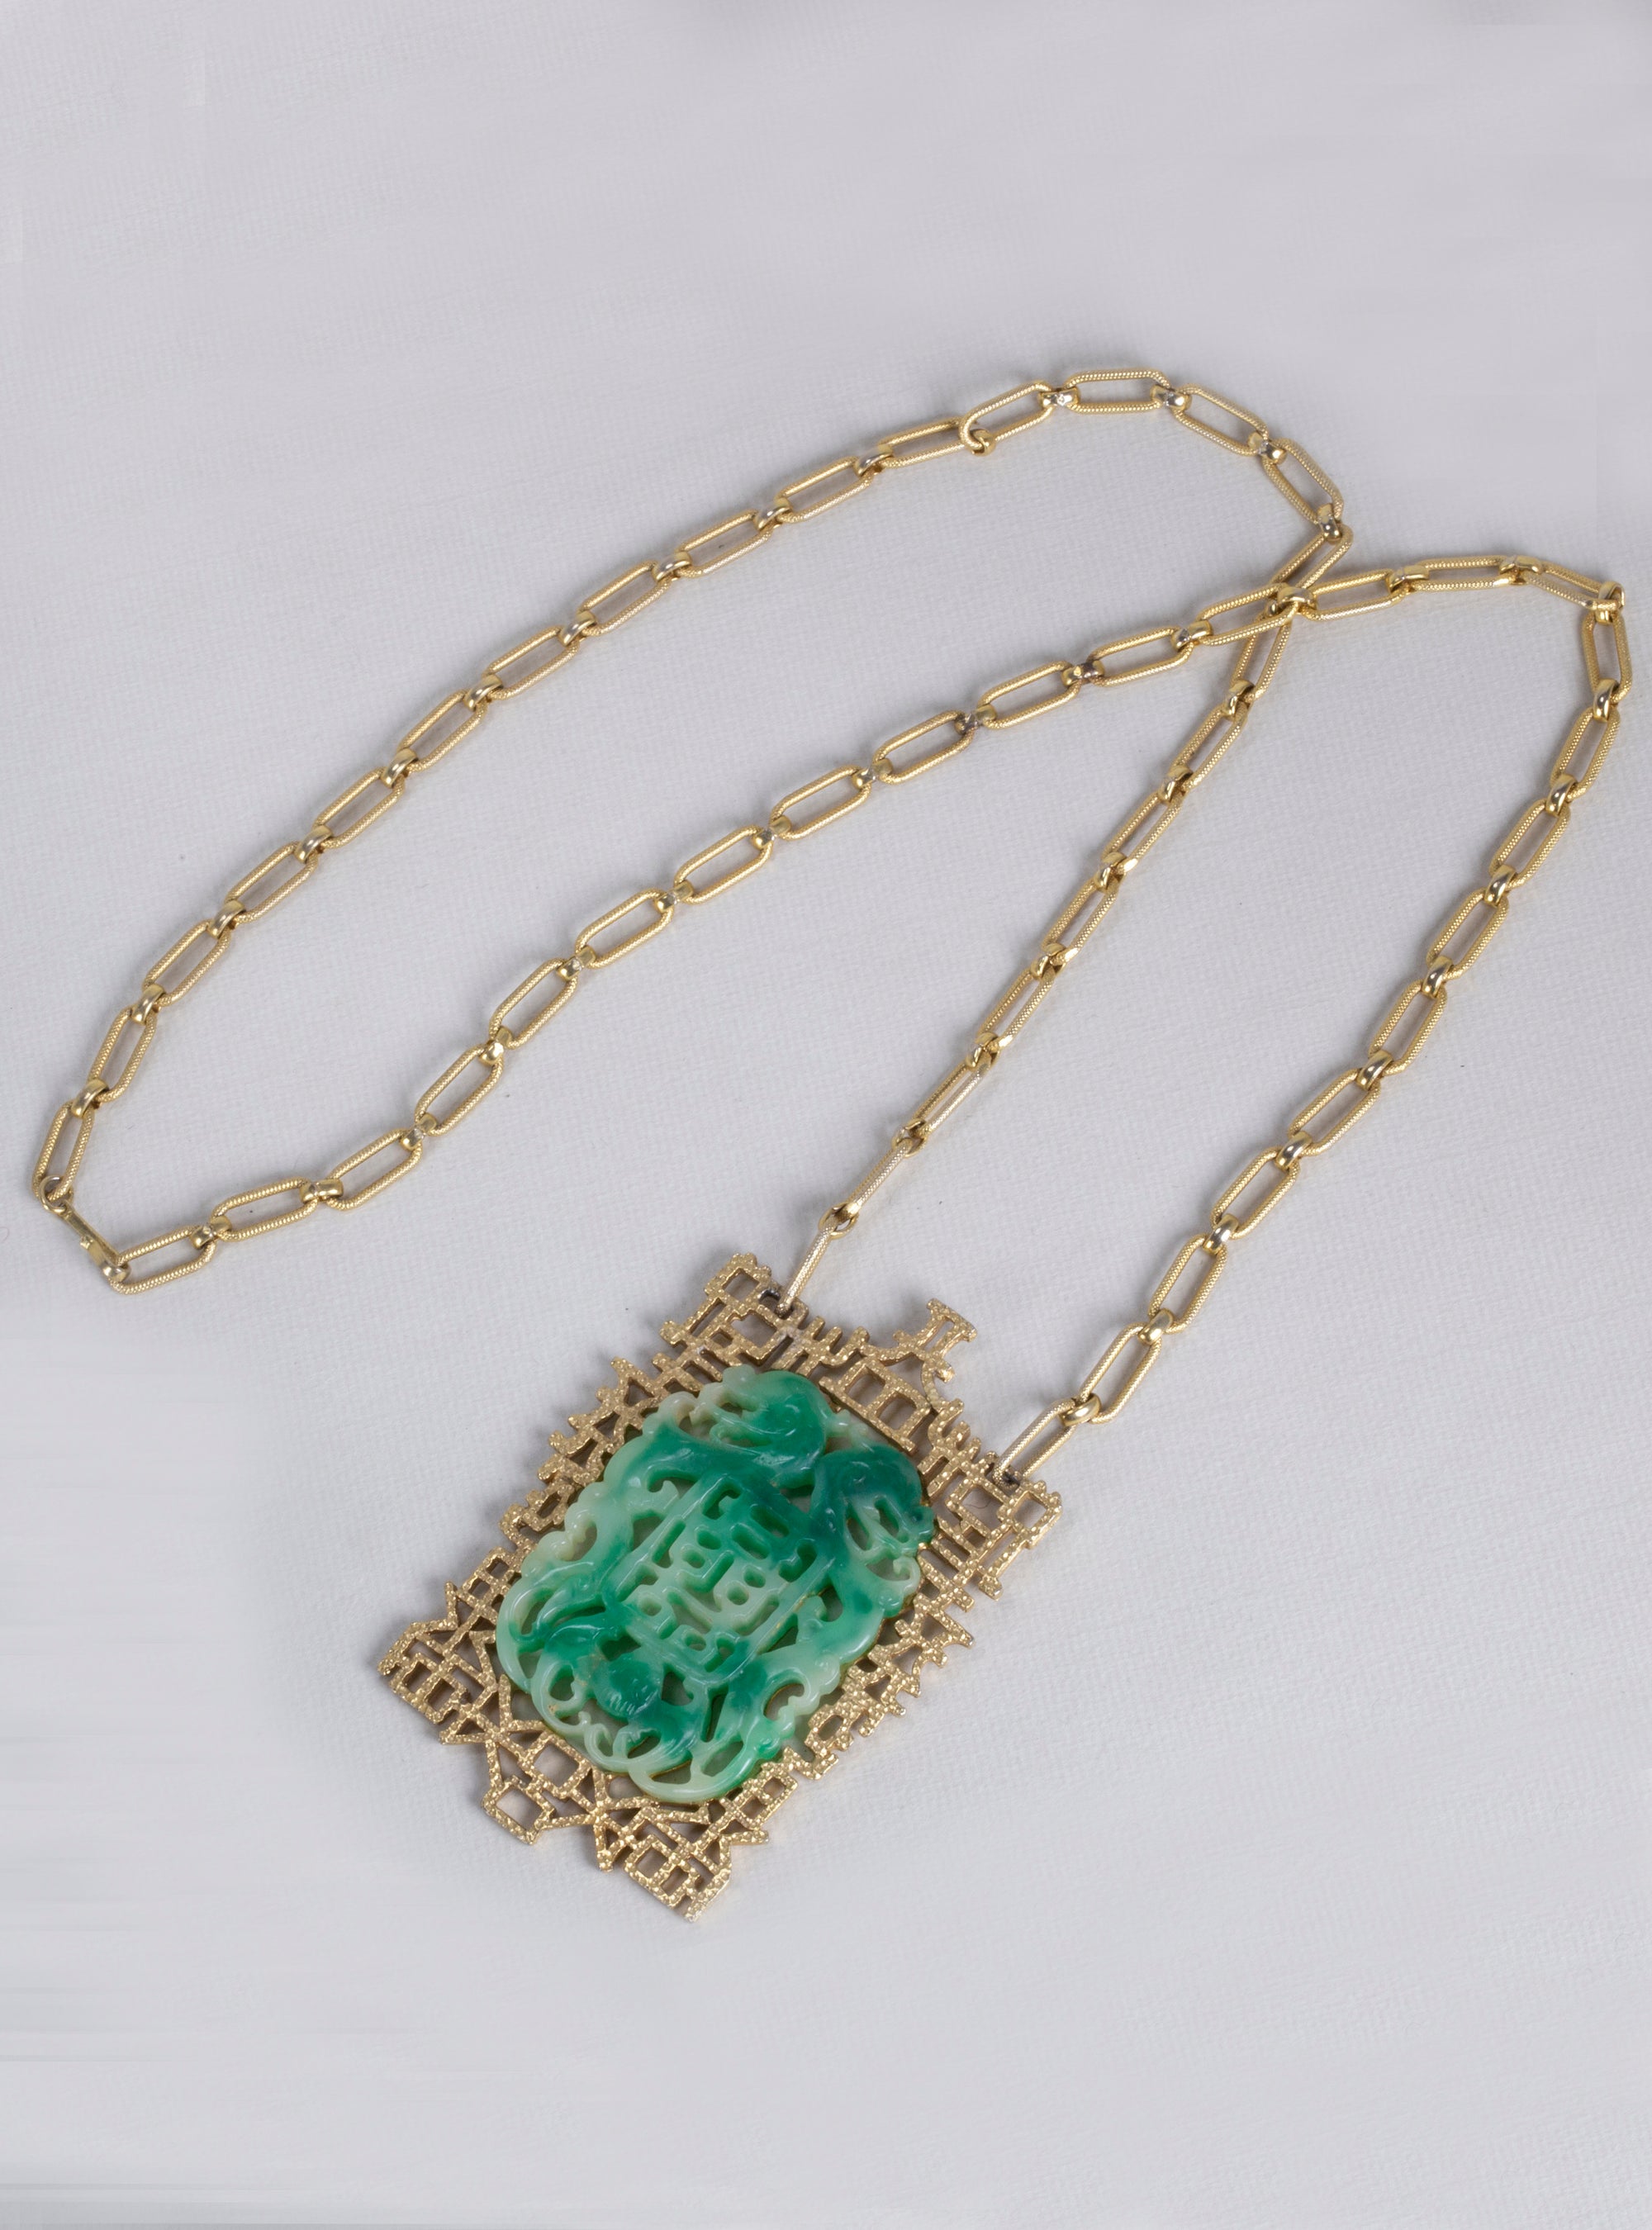 Jade and Gold Costume Pendant Necklace